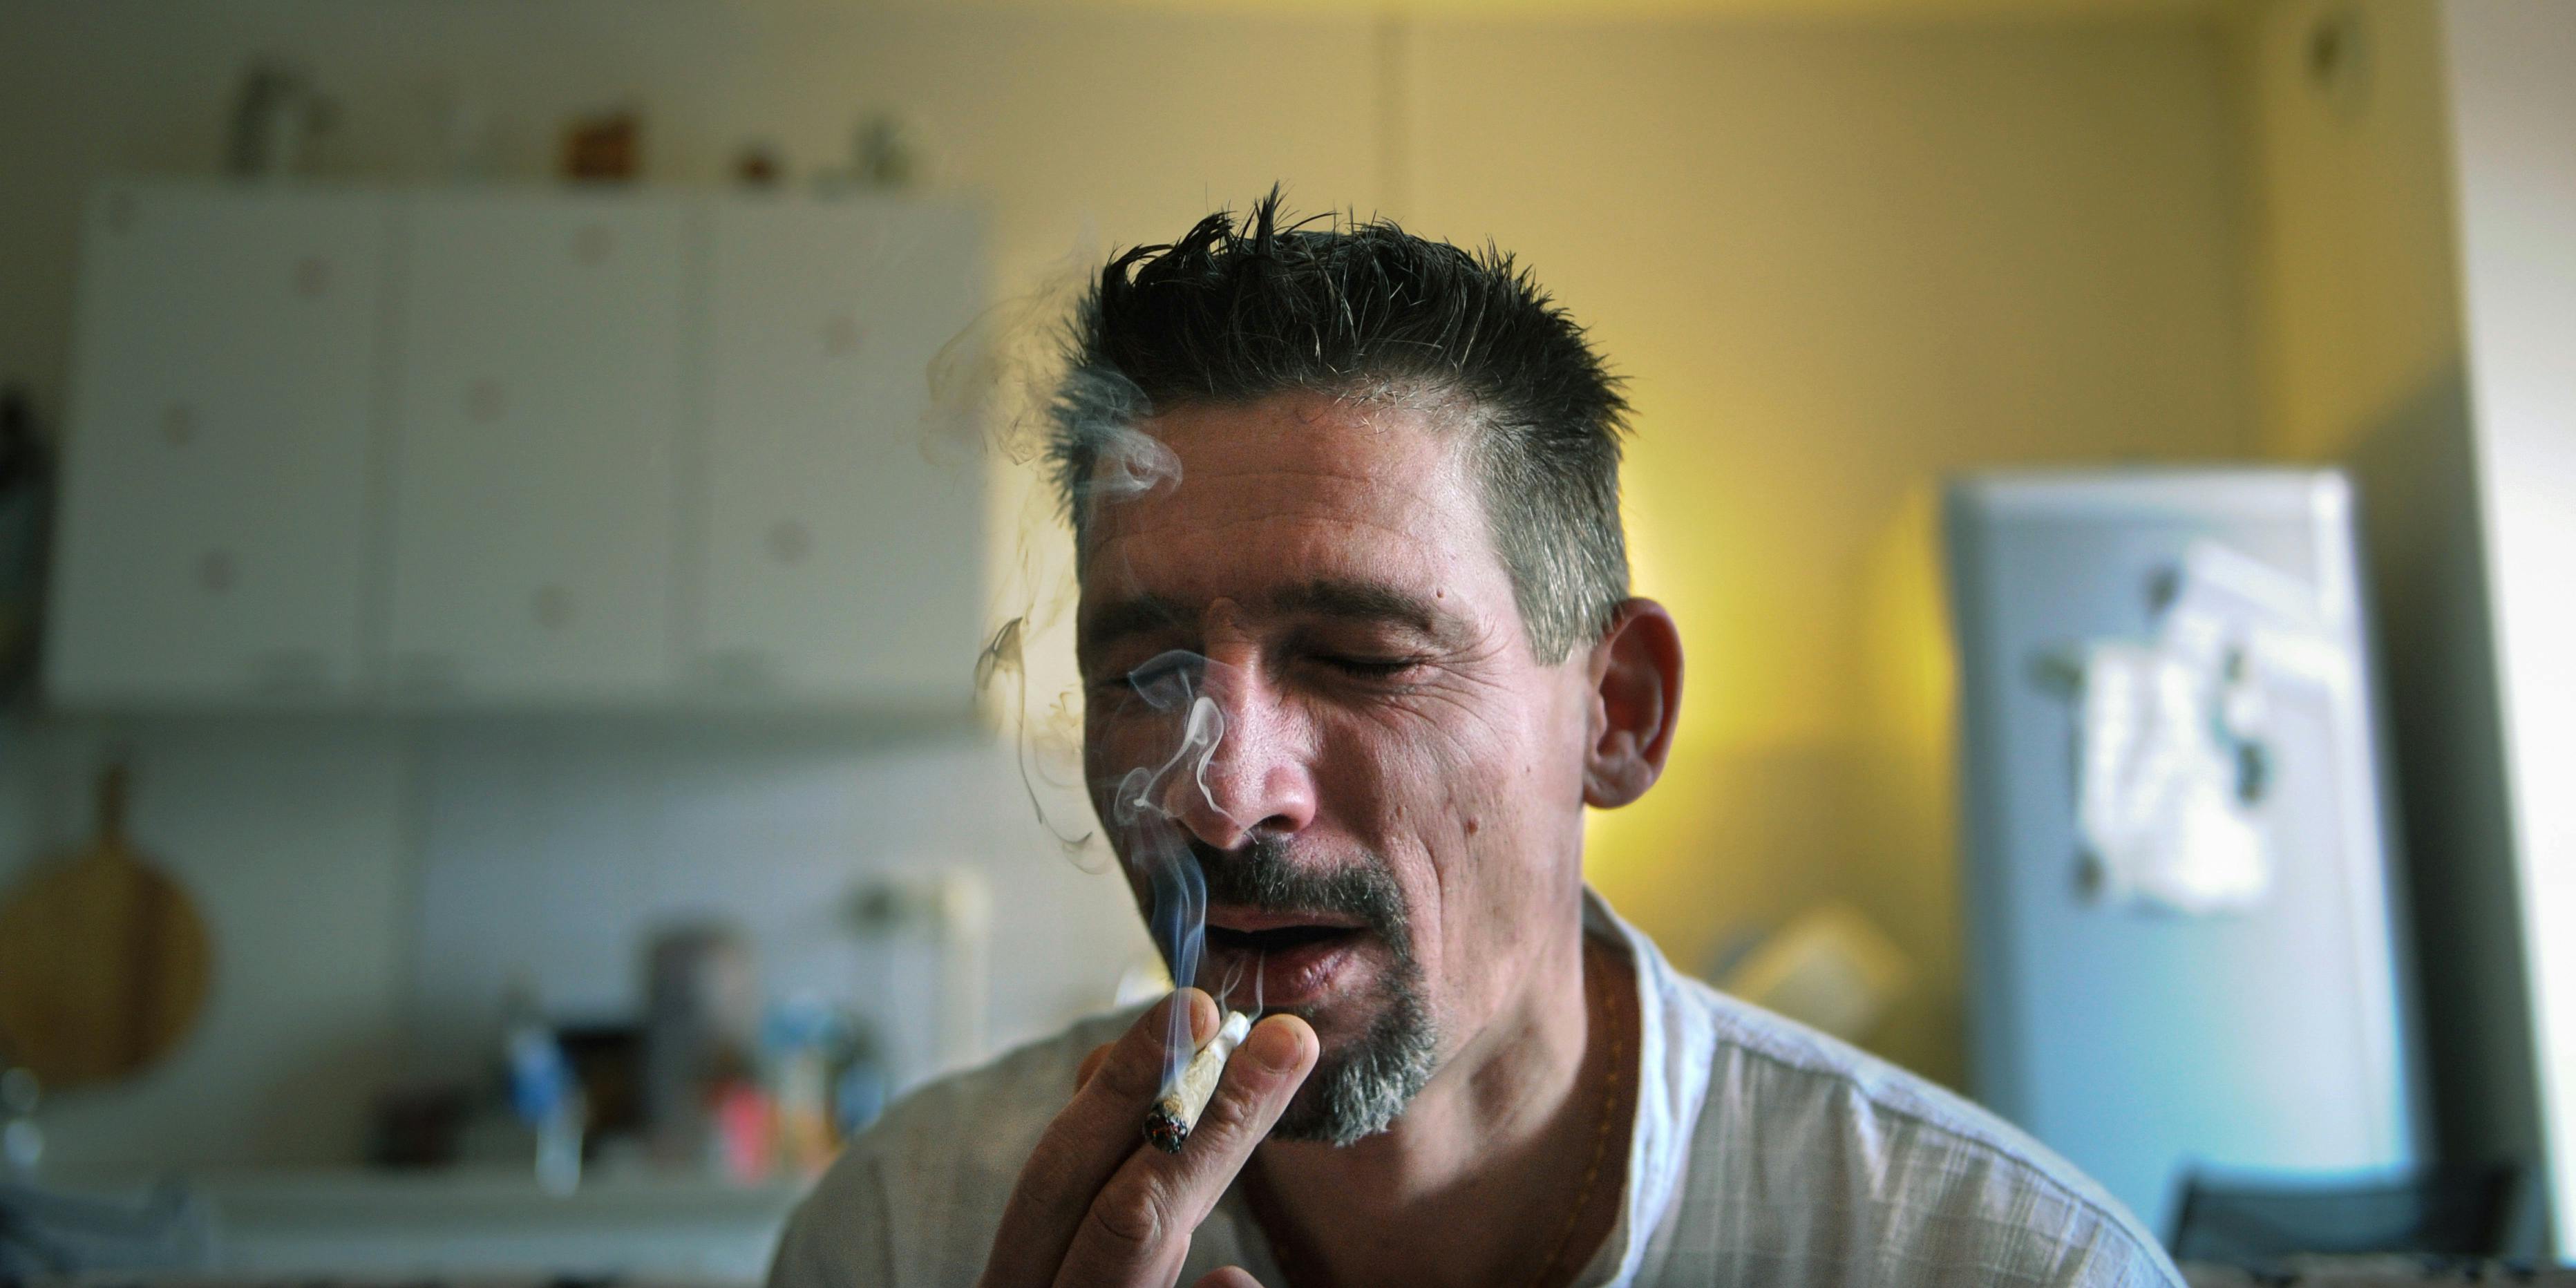 Dominique Loumachi, suffering from Dermatomyositis (Myopathy), smokes a cigarette that looks like a cannabis cigarette - in order not to be charged for promoting consumption of narcotic substances - while posing on February 28, 2013 in Belfort, Eastern France. Some medical marijuana patients prefer cannabis in smokeable form, but that hasn't prevented some states, like Oklahoma, from banning it.